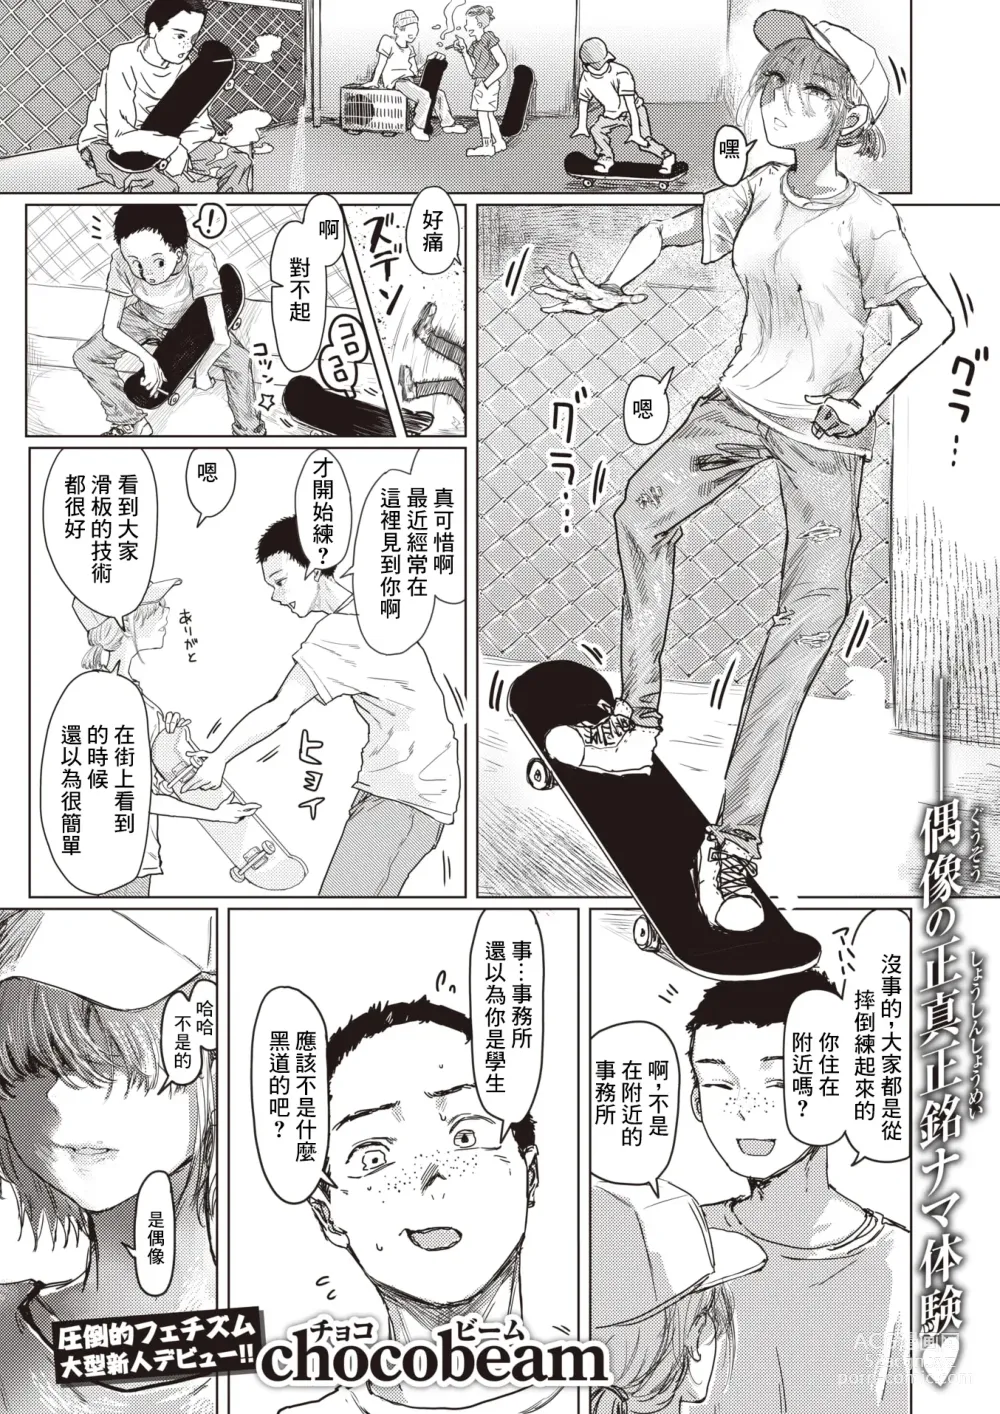 Page 2 of manga Fair is foul, and foul is fair